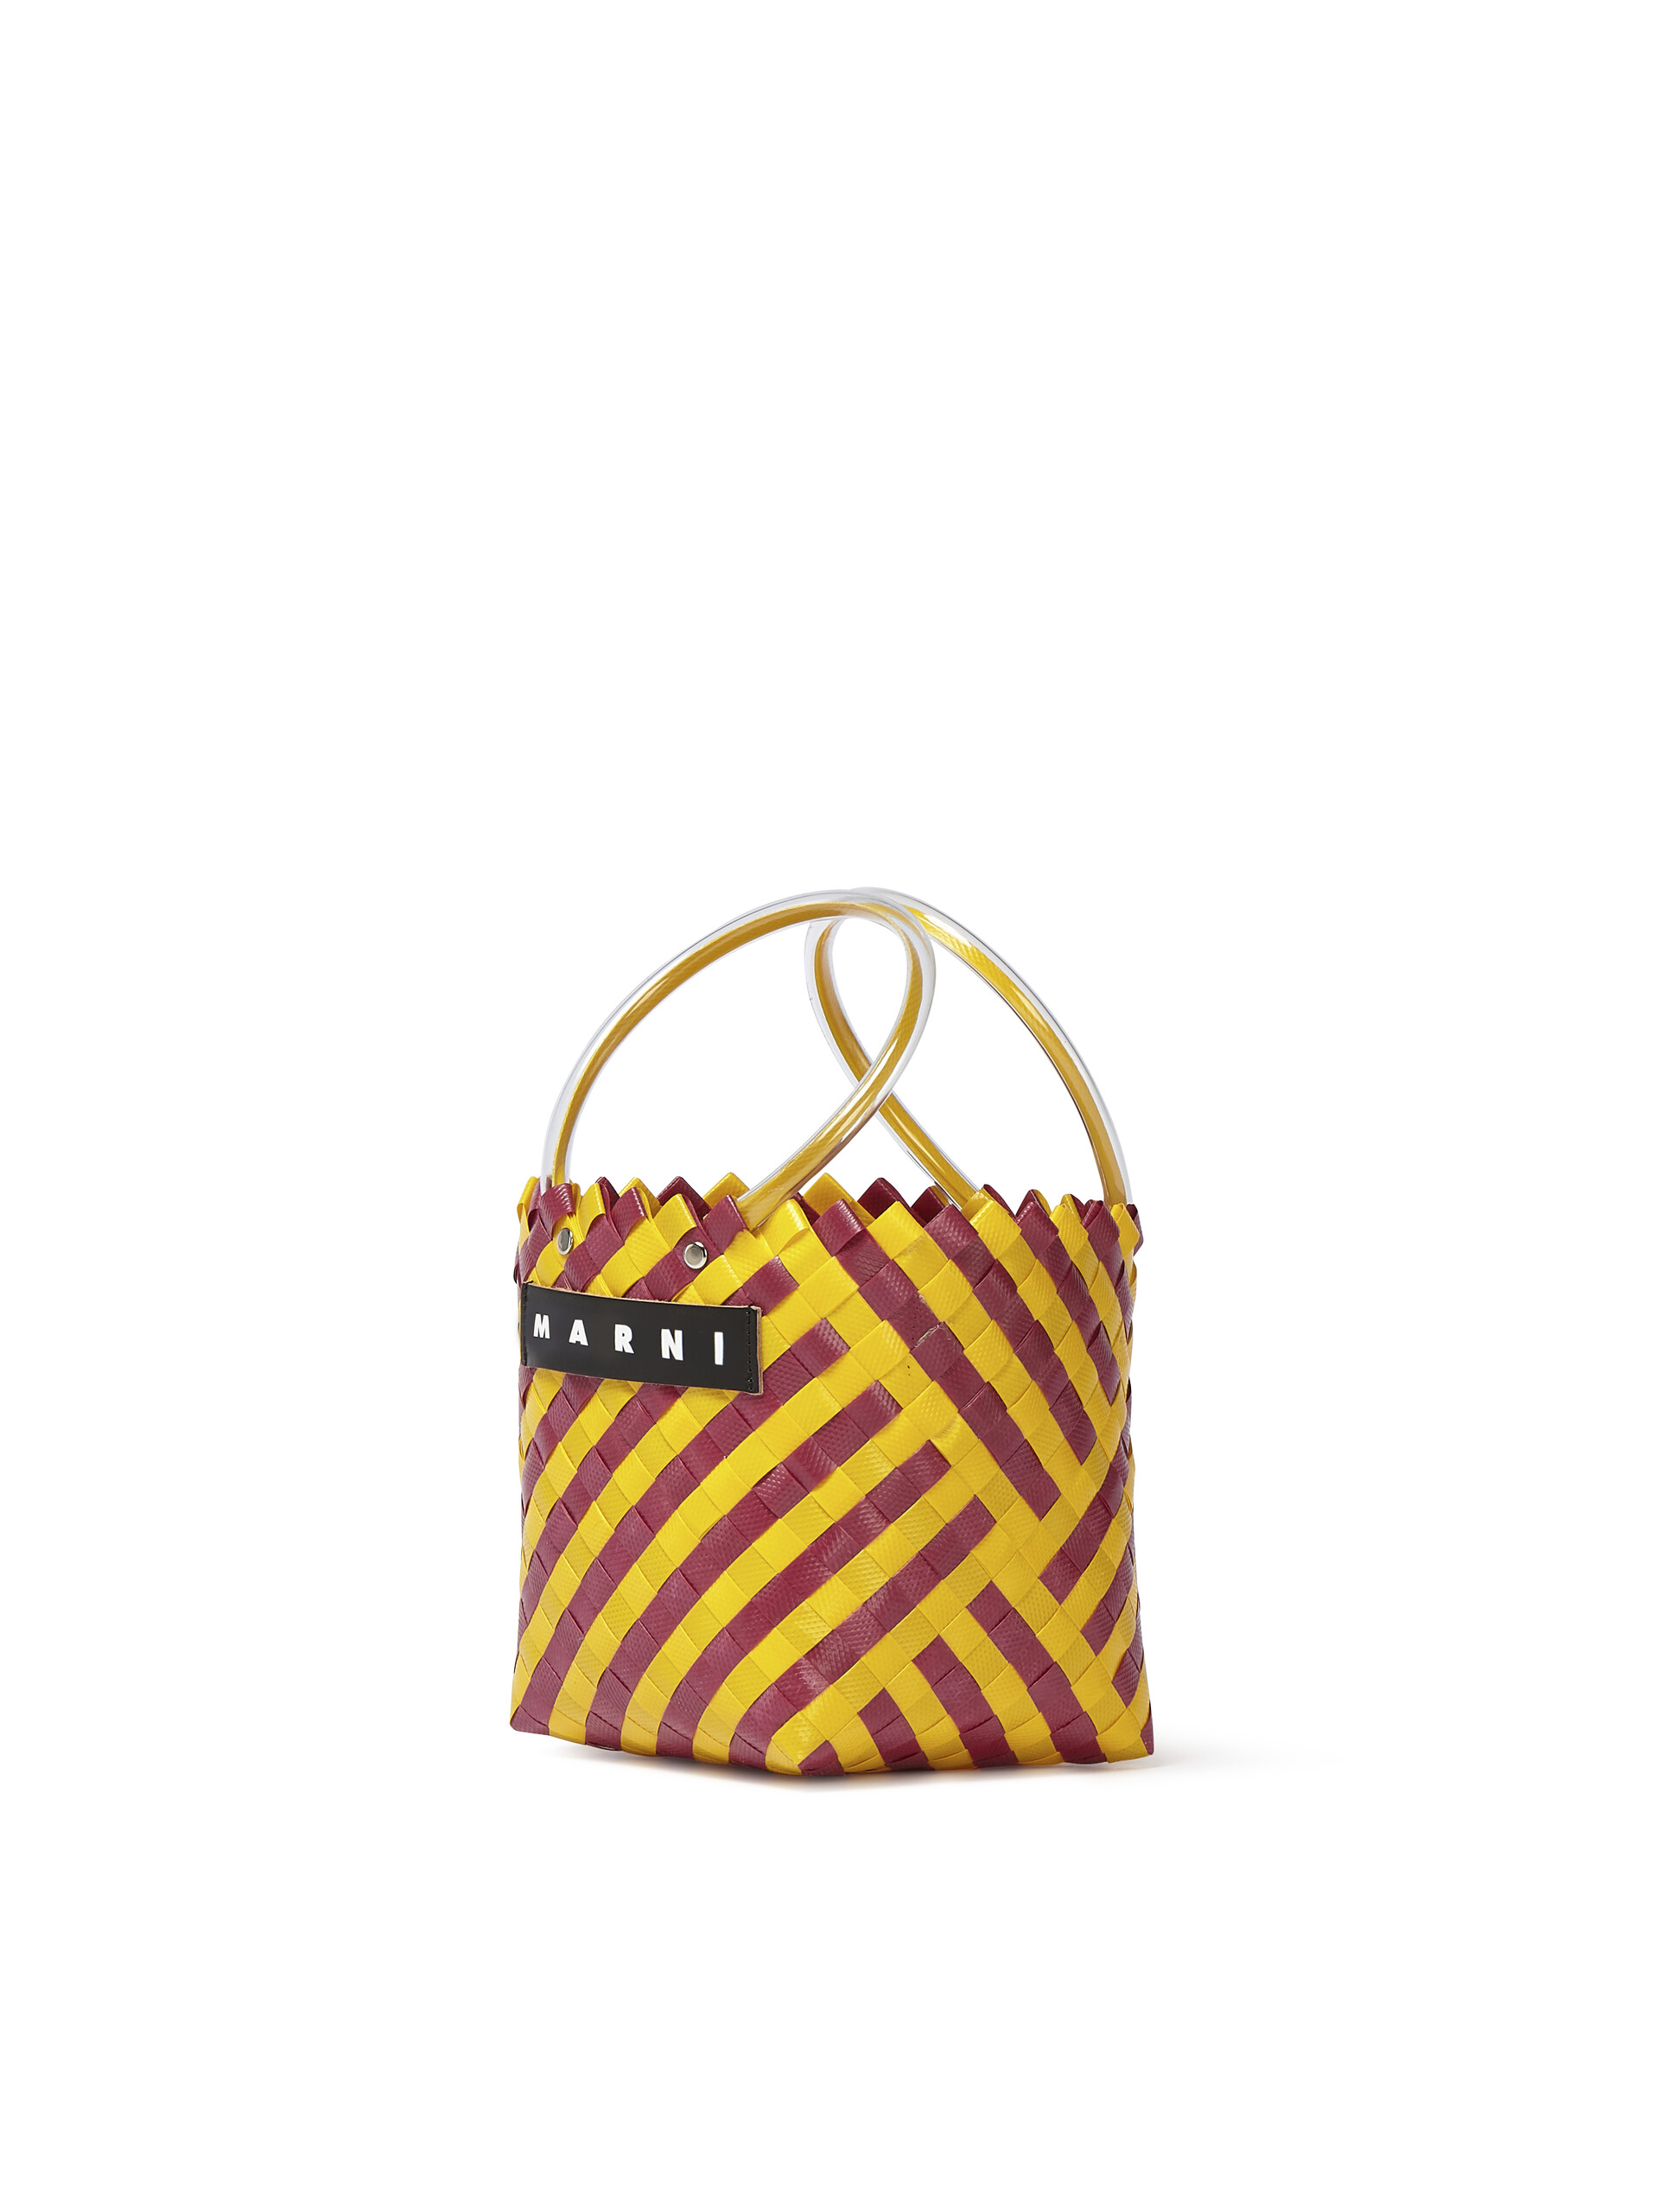 MARNI MARKET bag in yellow and burgundy woven material - Bags - Image 2